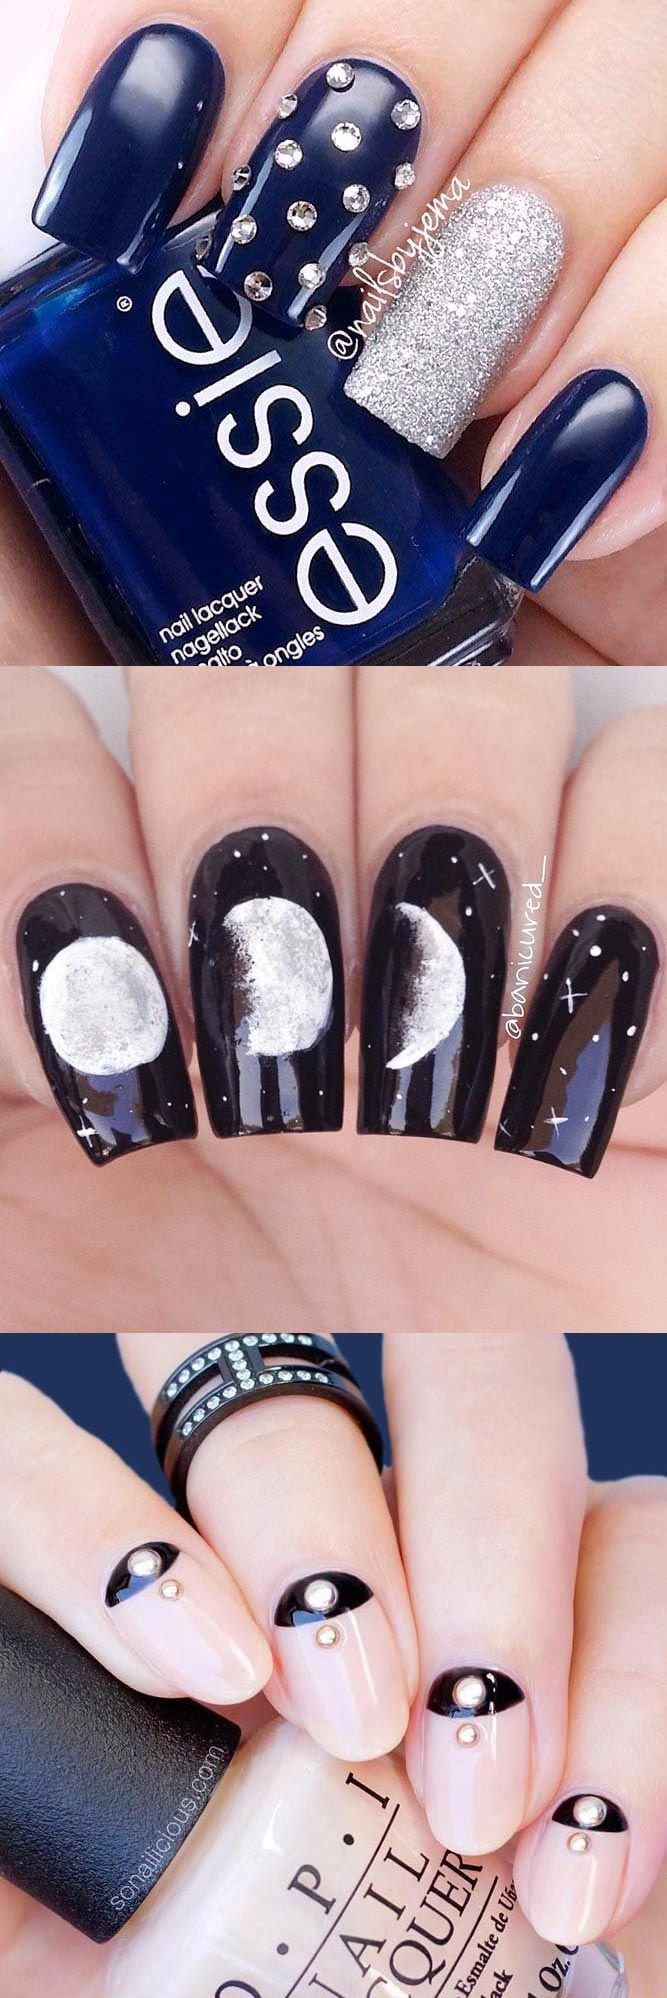 [ad_1]

Looking for some cool nails designs to impress your girlfriends? Whether you want sexy styles, elegant nail art, or cute nails, we have something for everyone!
Source by TrulyJessy
[ad_2]
			
			…